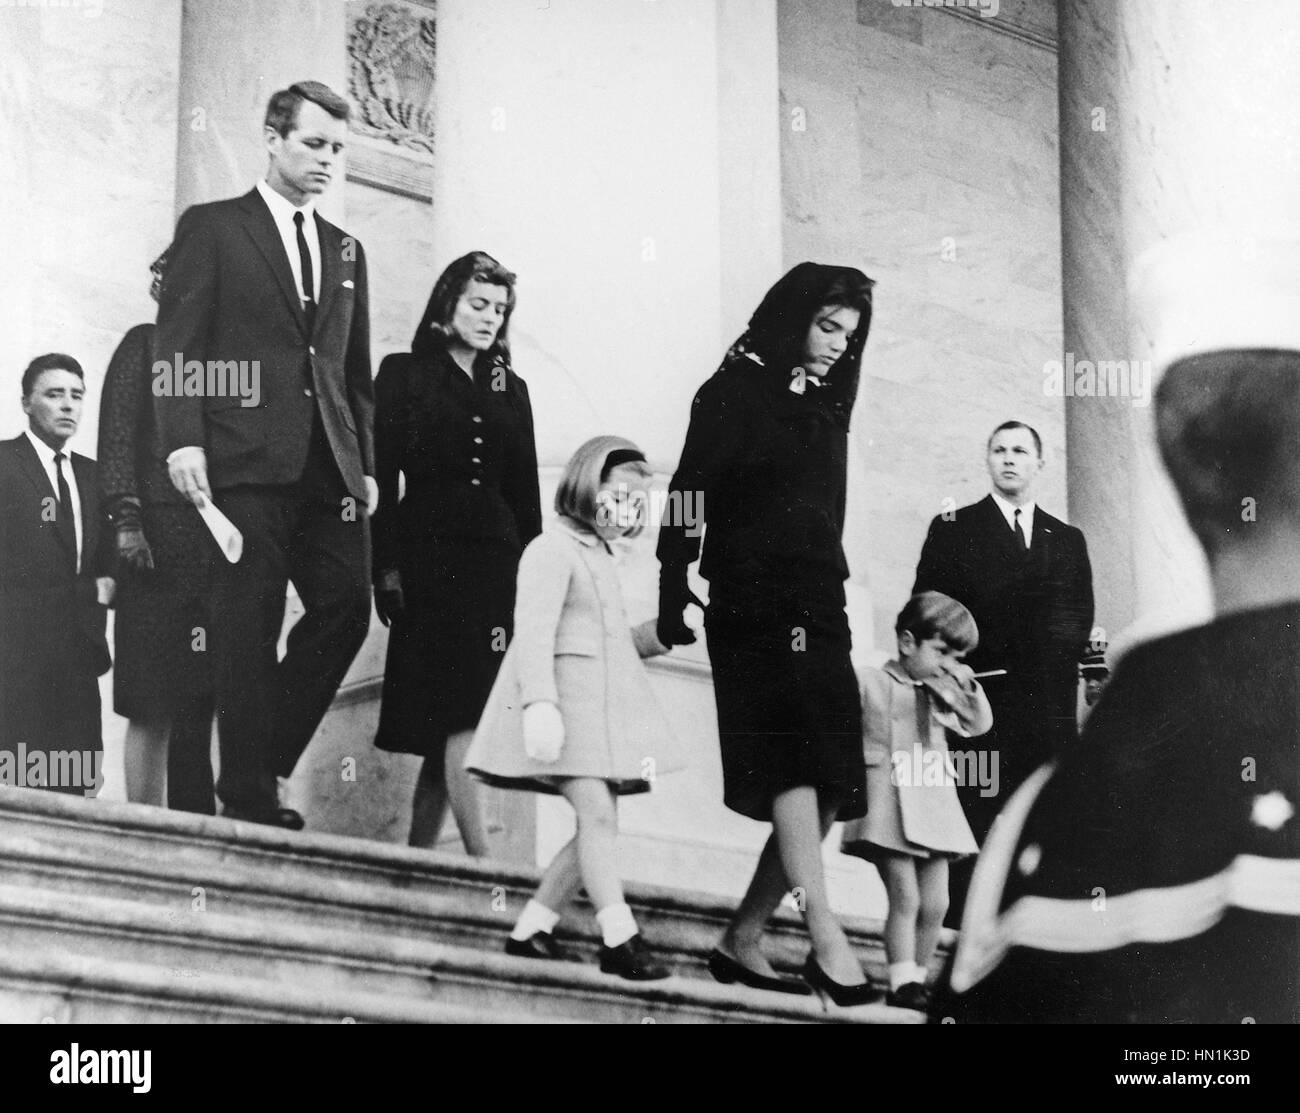 JOHN F. KENNEDY FUNERAL  The family  leaving his funeral service at the Capitol Building in Washington on 25 November 1963. From left: Peter Lawford, Bobby Kennedy, Jean Kennedy, Caroline Kennedy, Jacqueline and John Kennedy Jnr. Photo: Abbie Row/White House Stock Photo